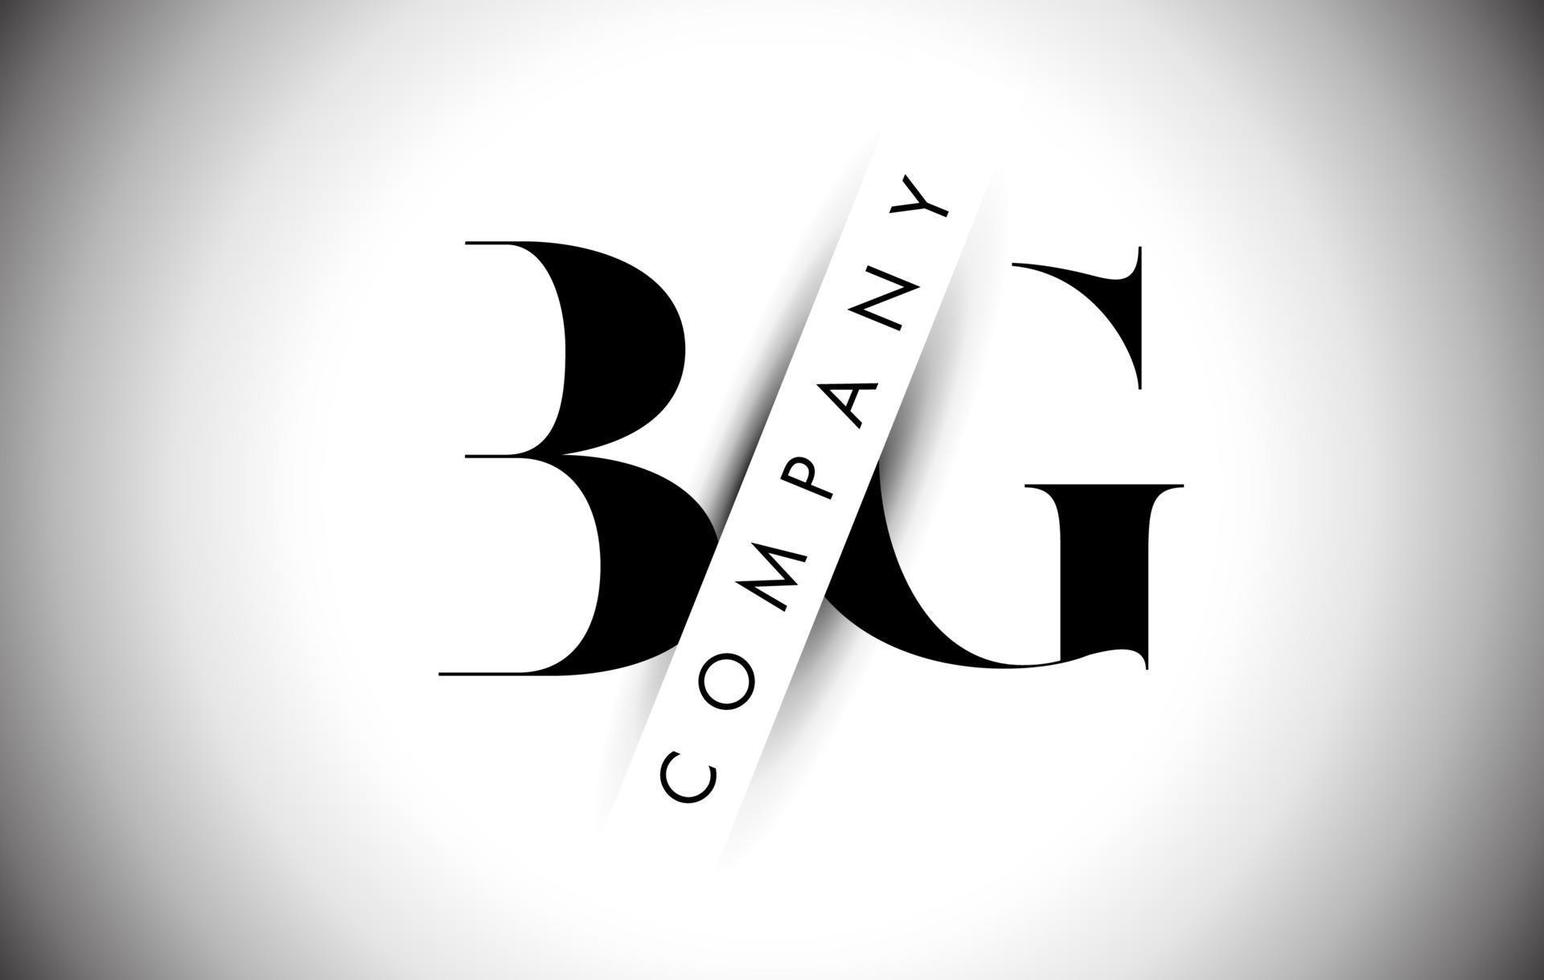 BG B G Letter Logo with Creative Shadow Cut and Overlayered Text Design. vector